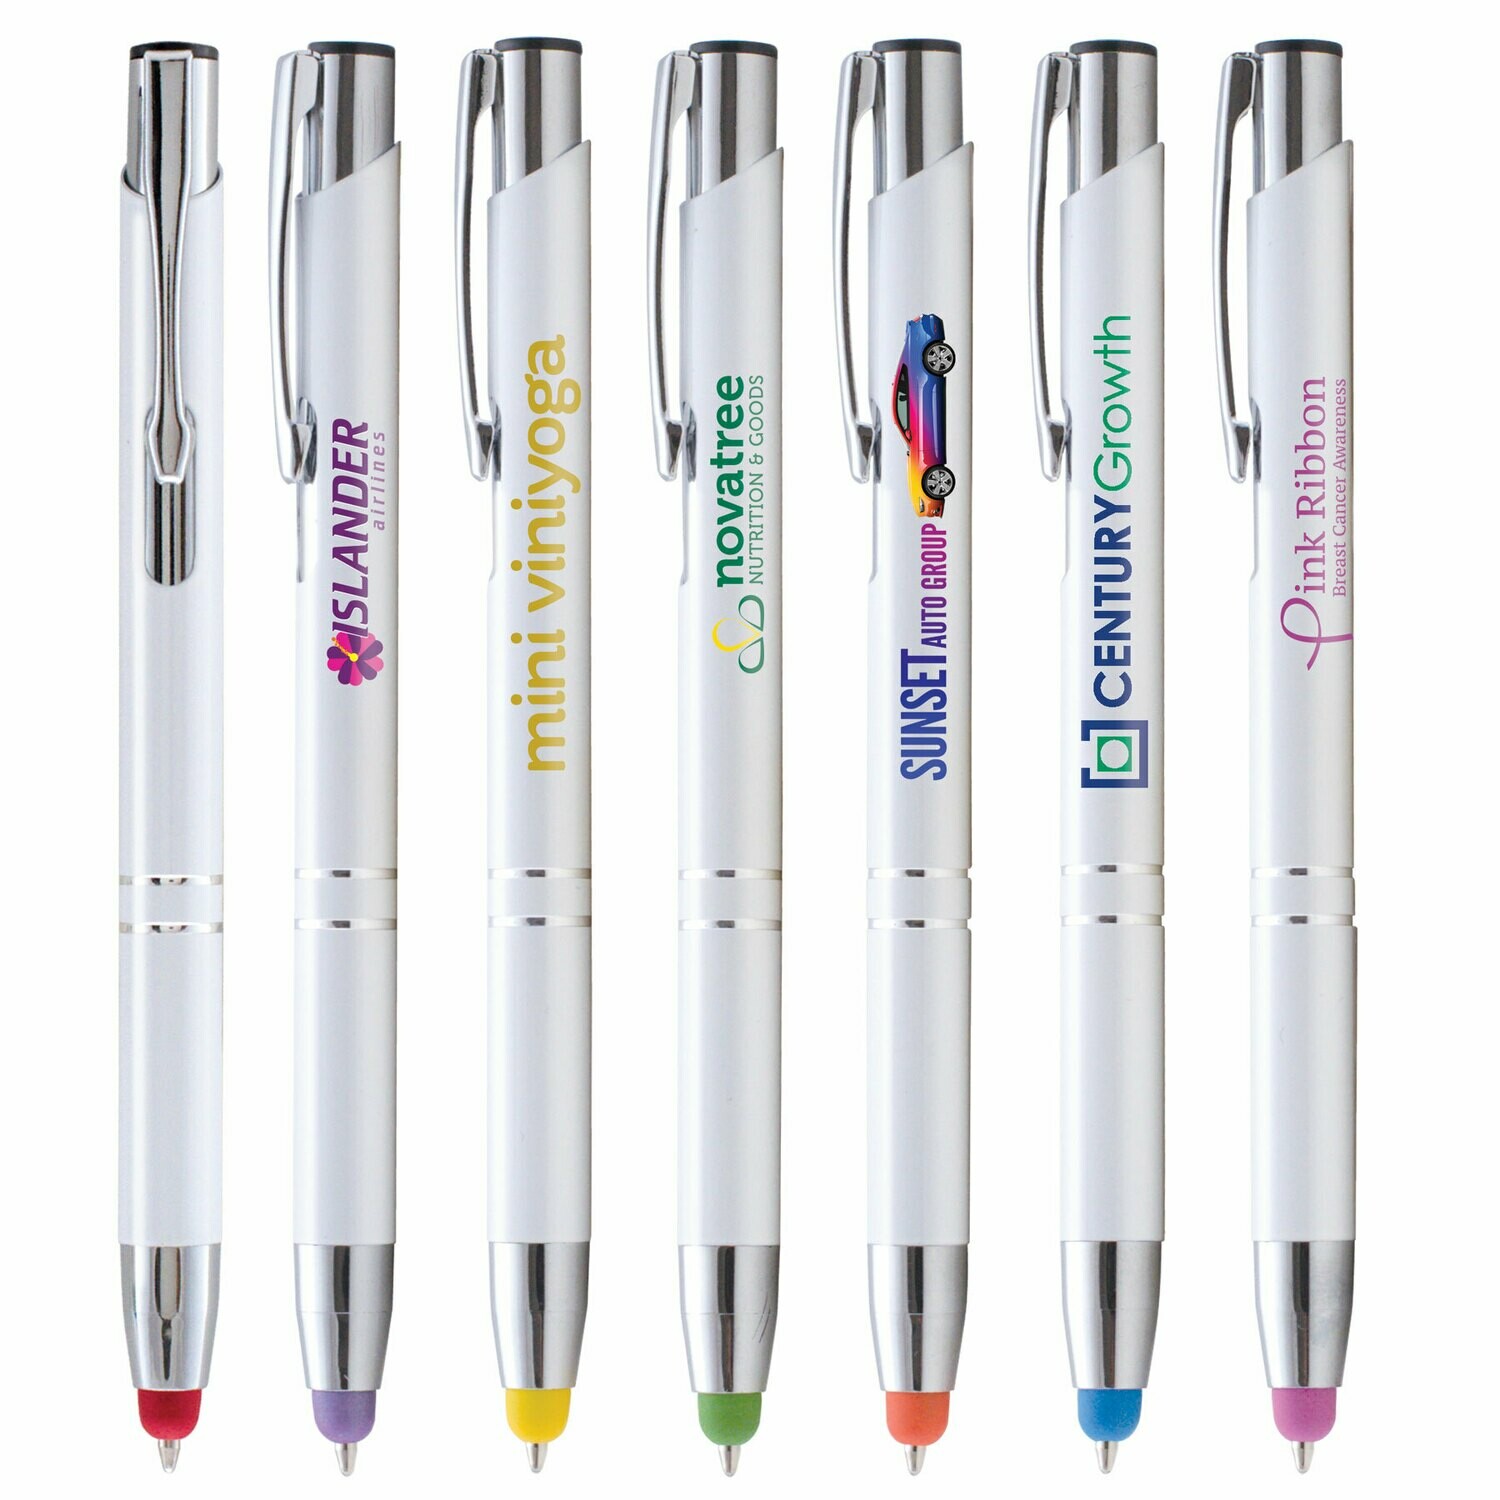 Tres-Chic Brights With Stylus - ColorJet